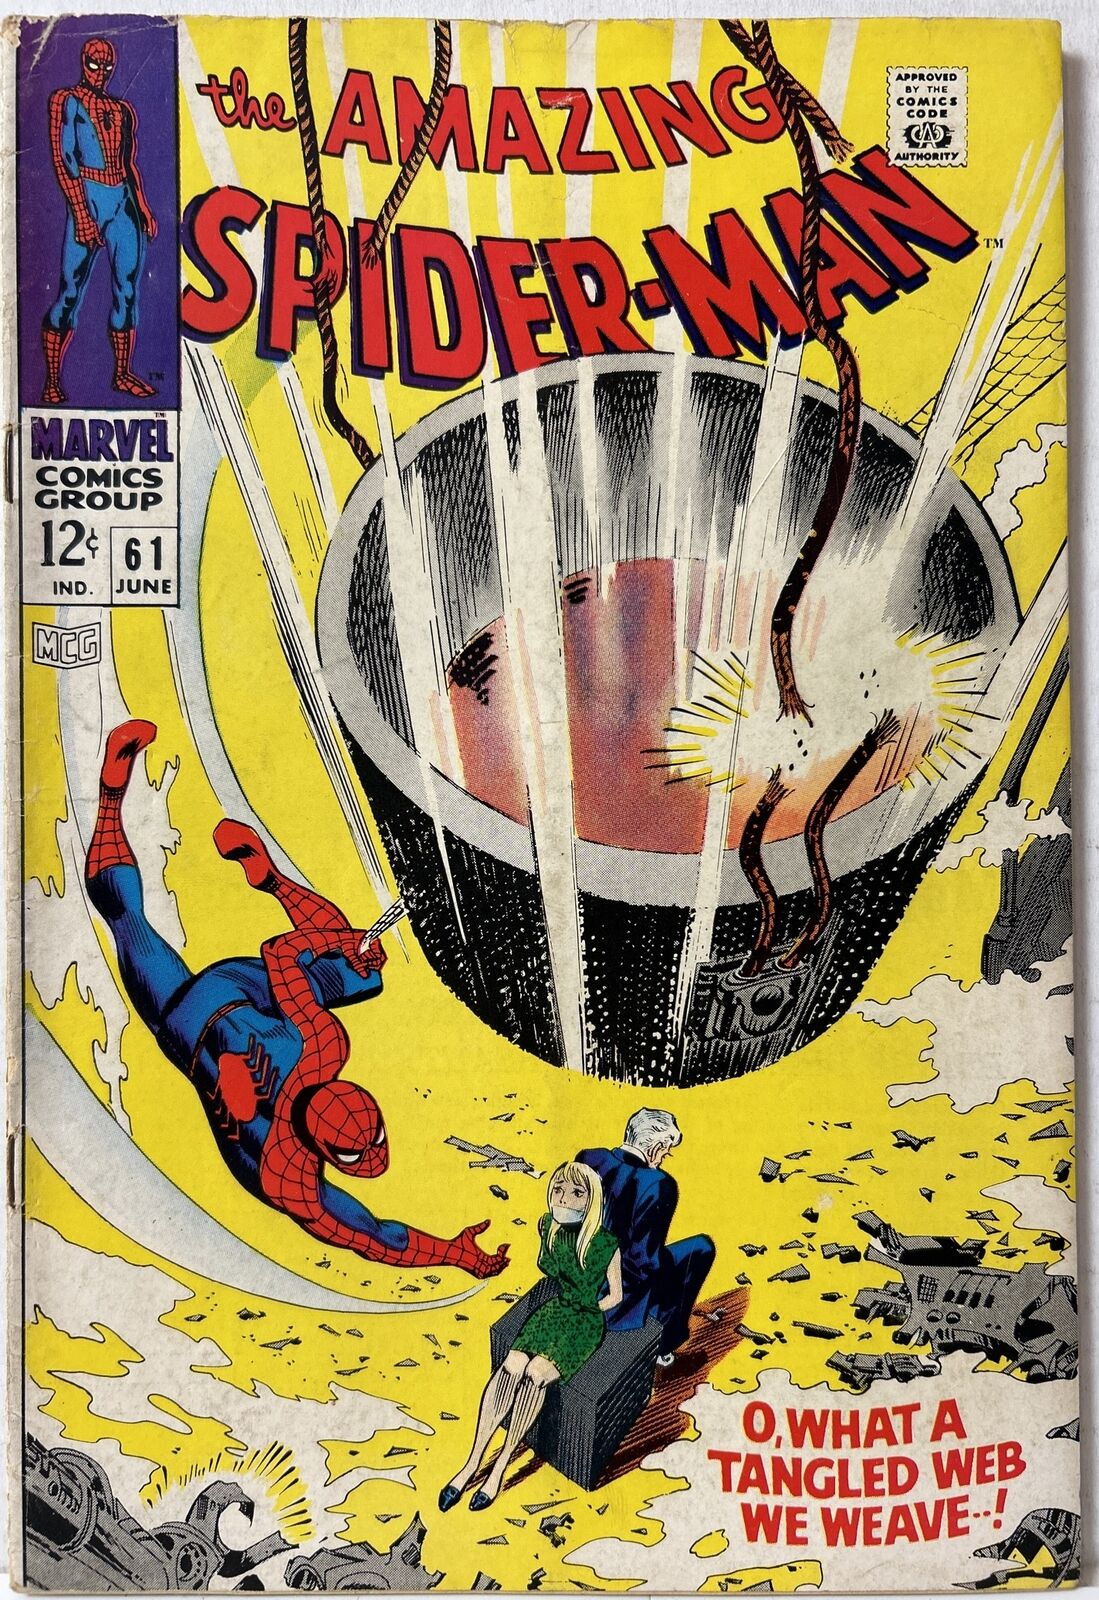 Amazing Spider-Man #61 Marvel 1968 1st Gwen Stacy Cover Vintage Comic Book VG+